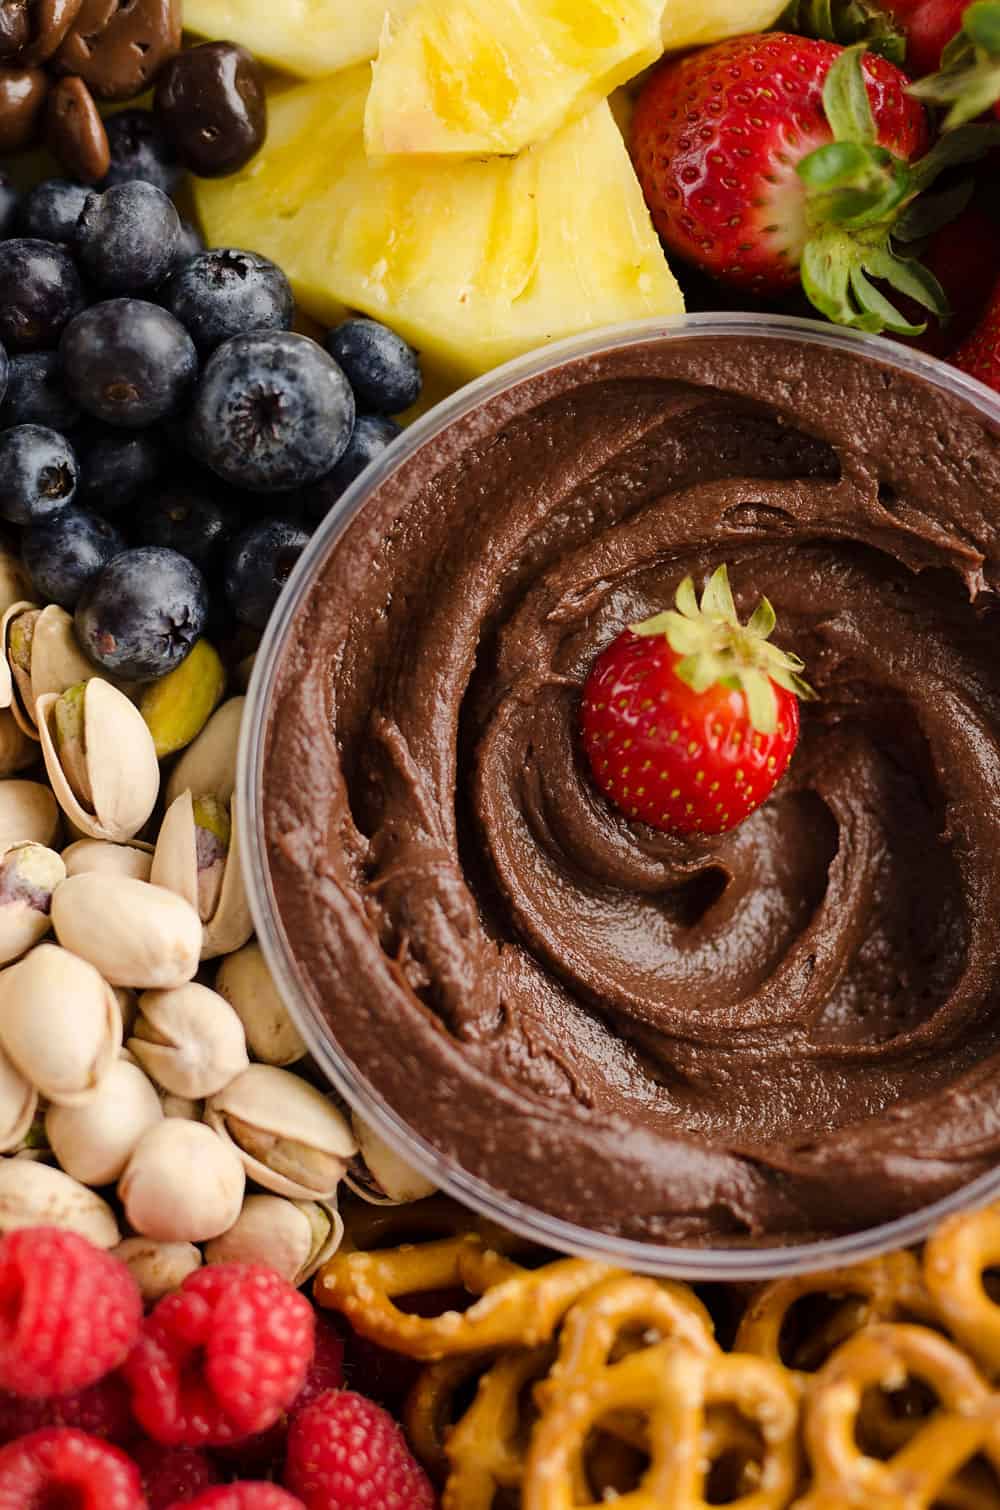 Healthy Fruit & Chocolate Party Tray hummus dipped with strawberry